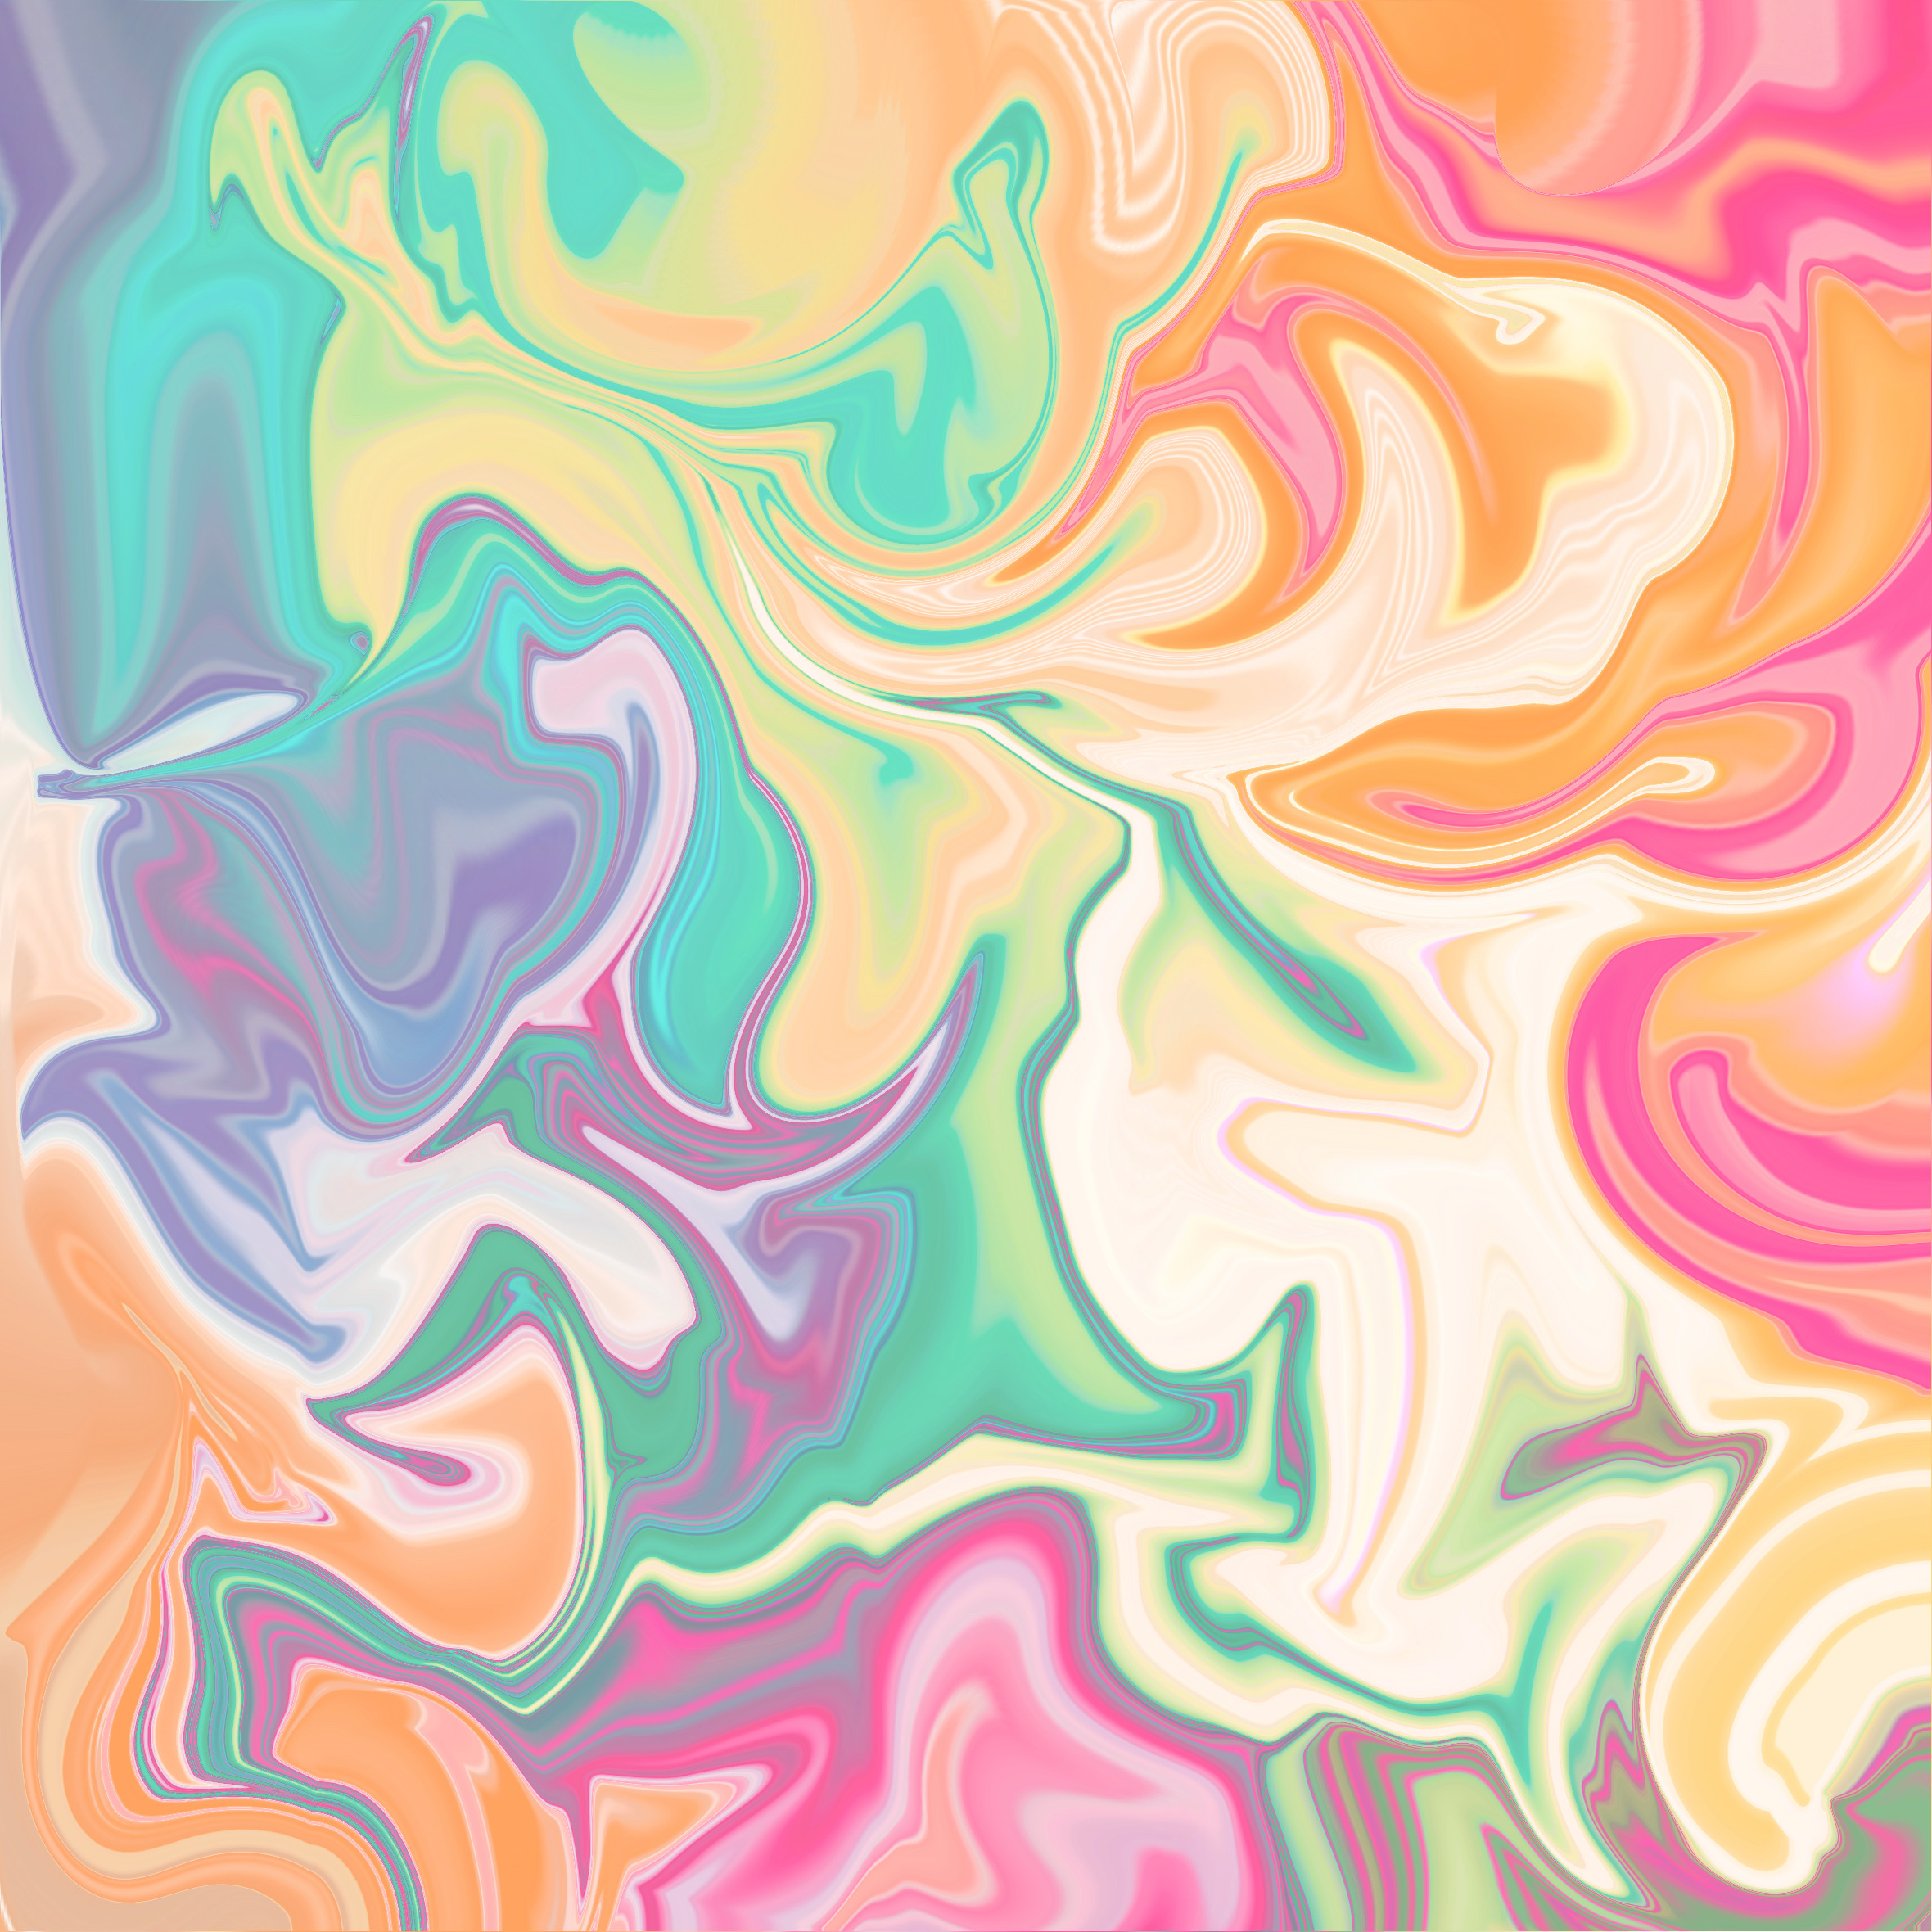 This visual is about freetoedit tiedye swirl 70s aesthetic background #free...